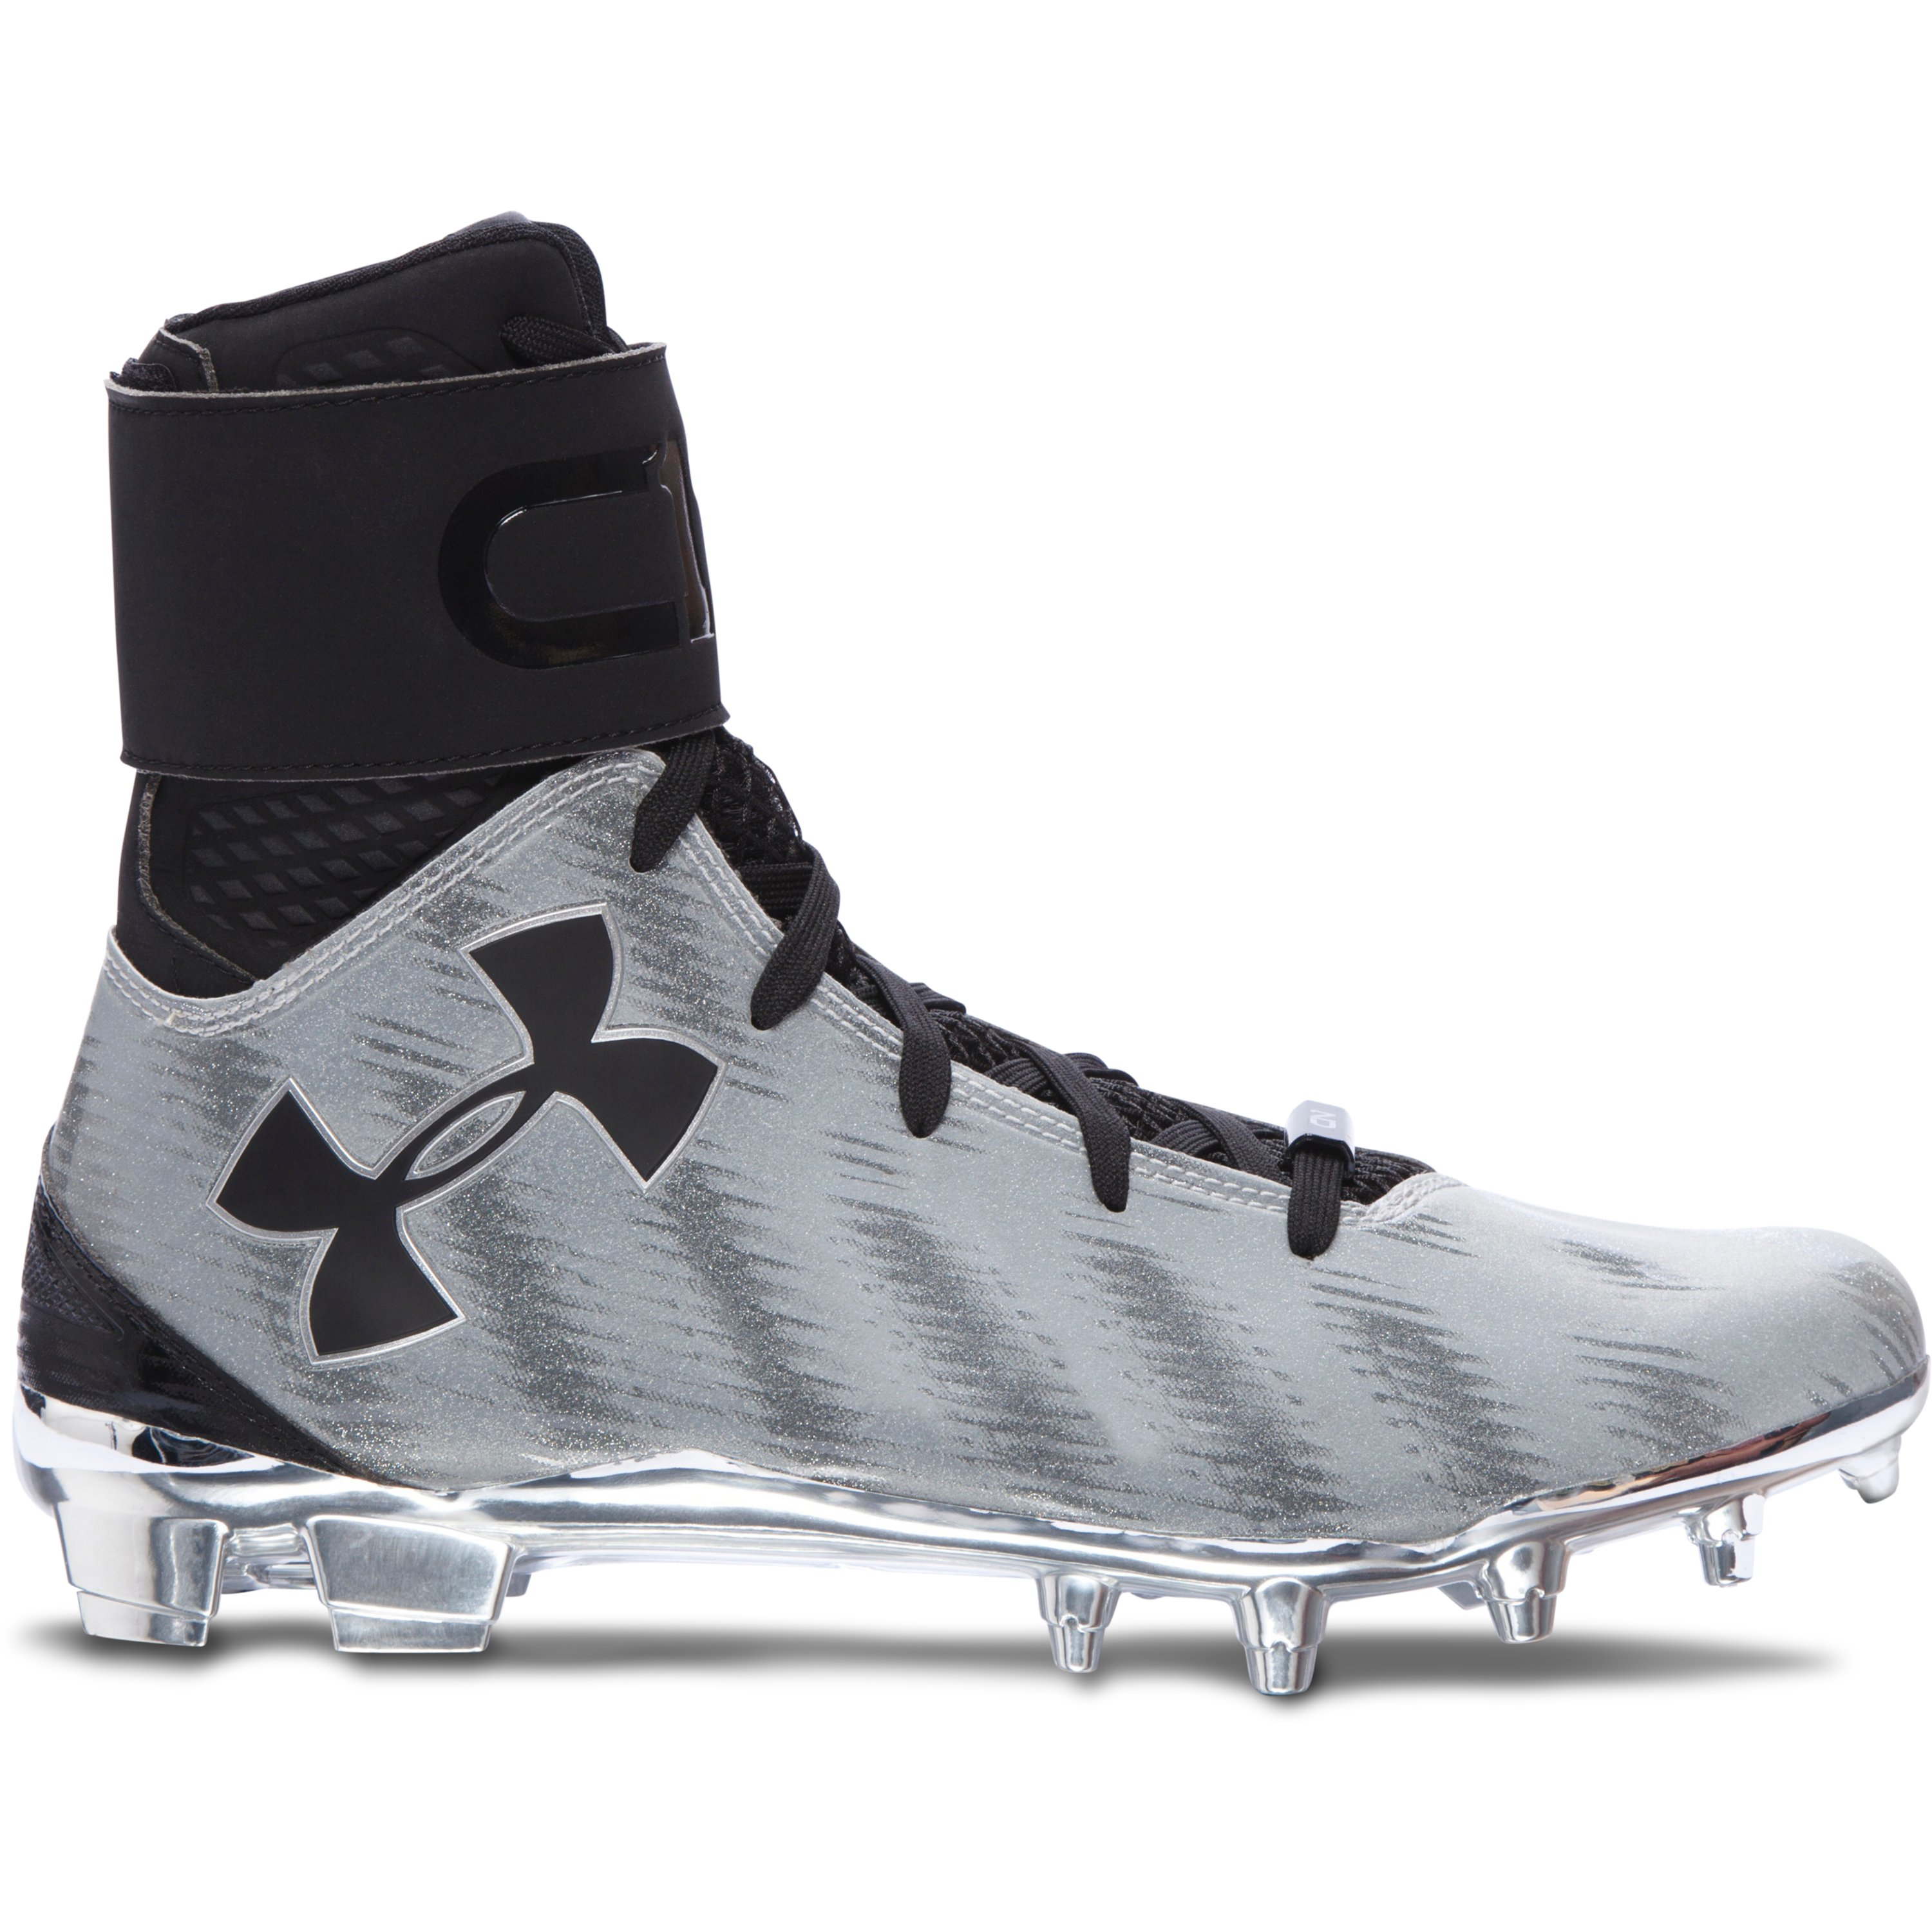 Under Armour C1N MC Men's Football Cleats Style 3000175-001 MSRP $160 